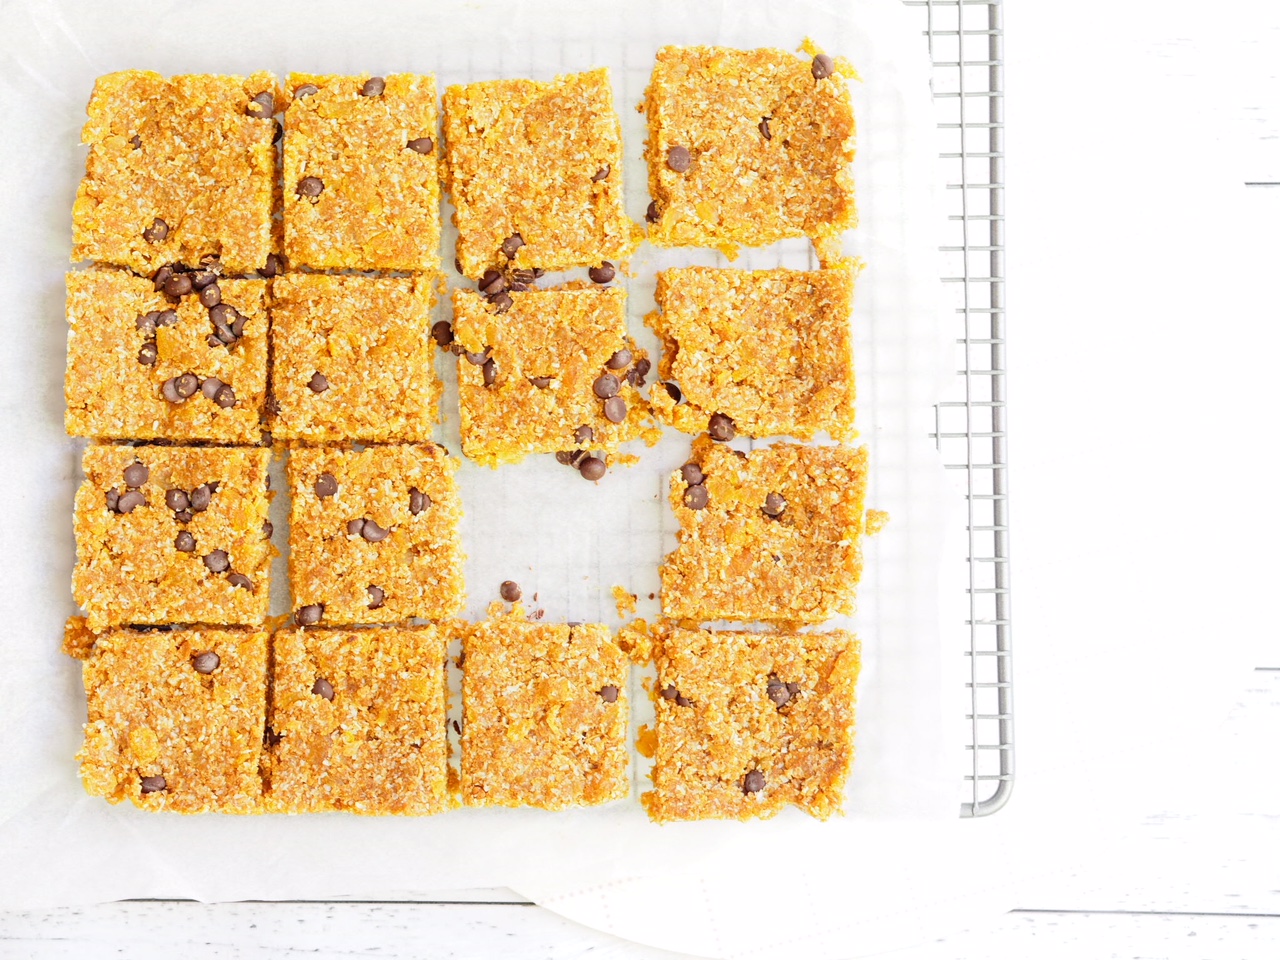 No Bake Apricot Slice with Choc Chips